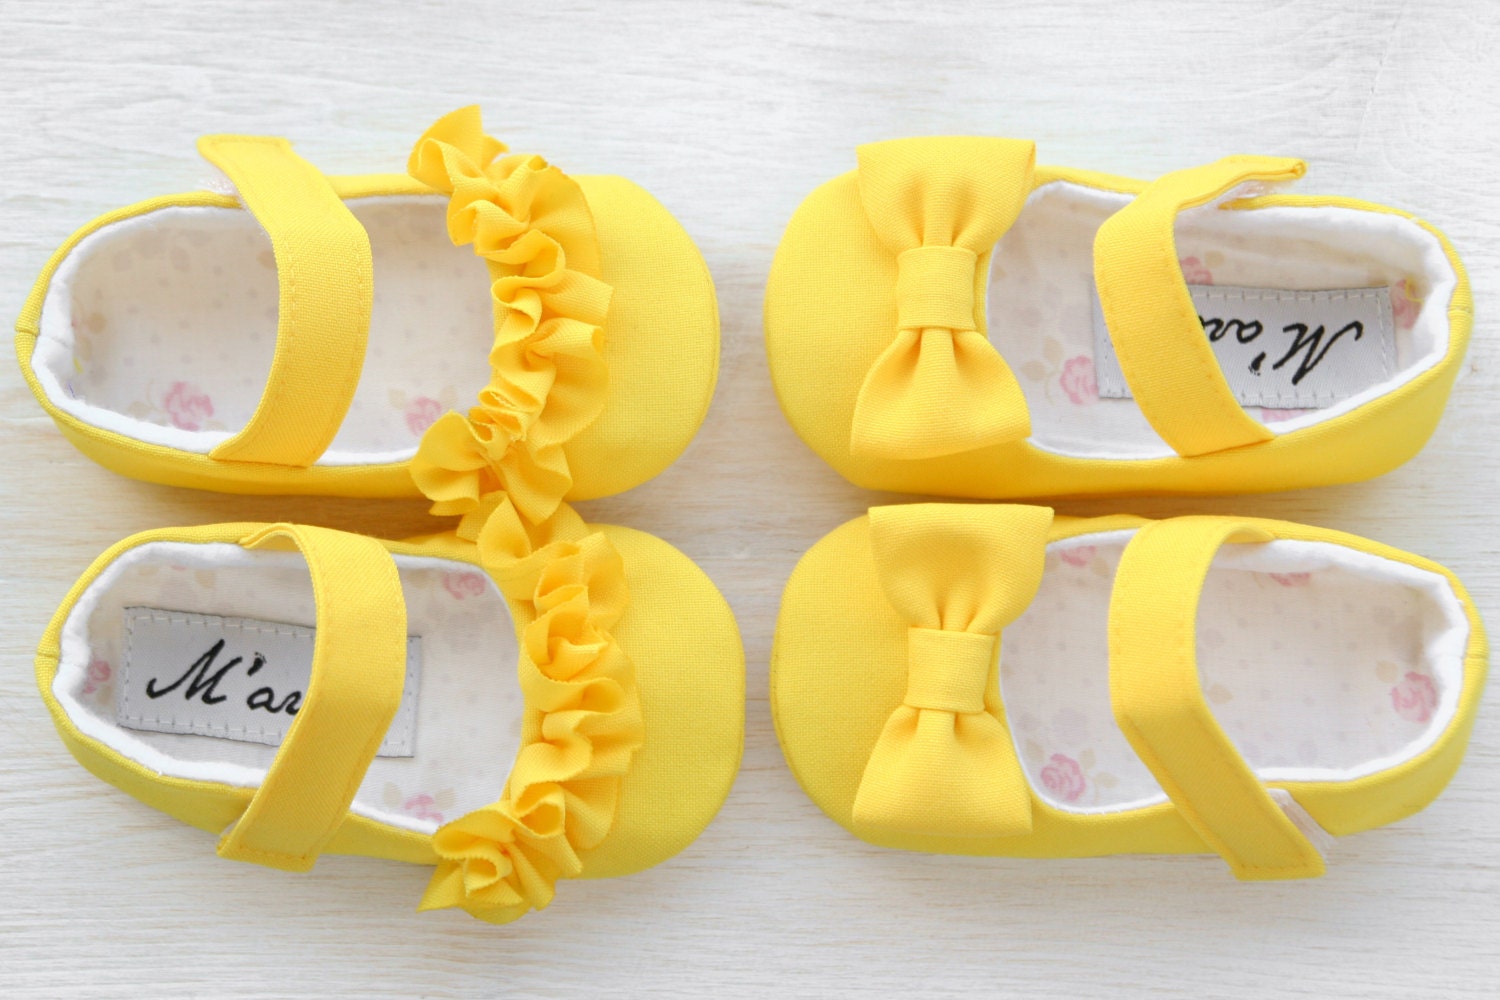 Yellow baby girl shoes with RUFFLES or BOWS vibrant yellow